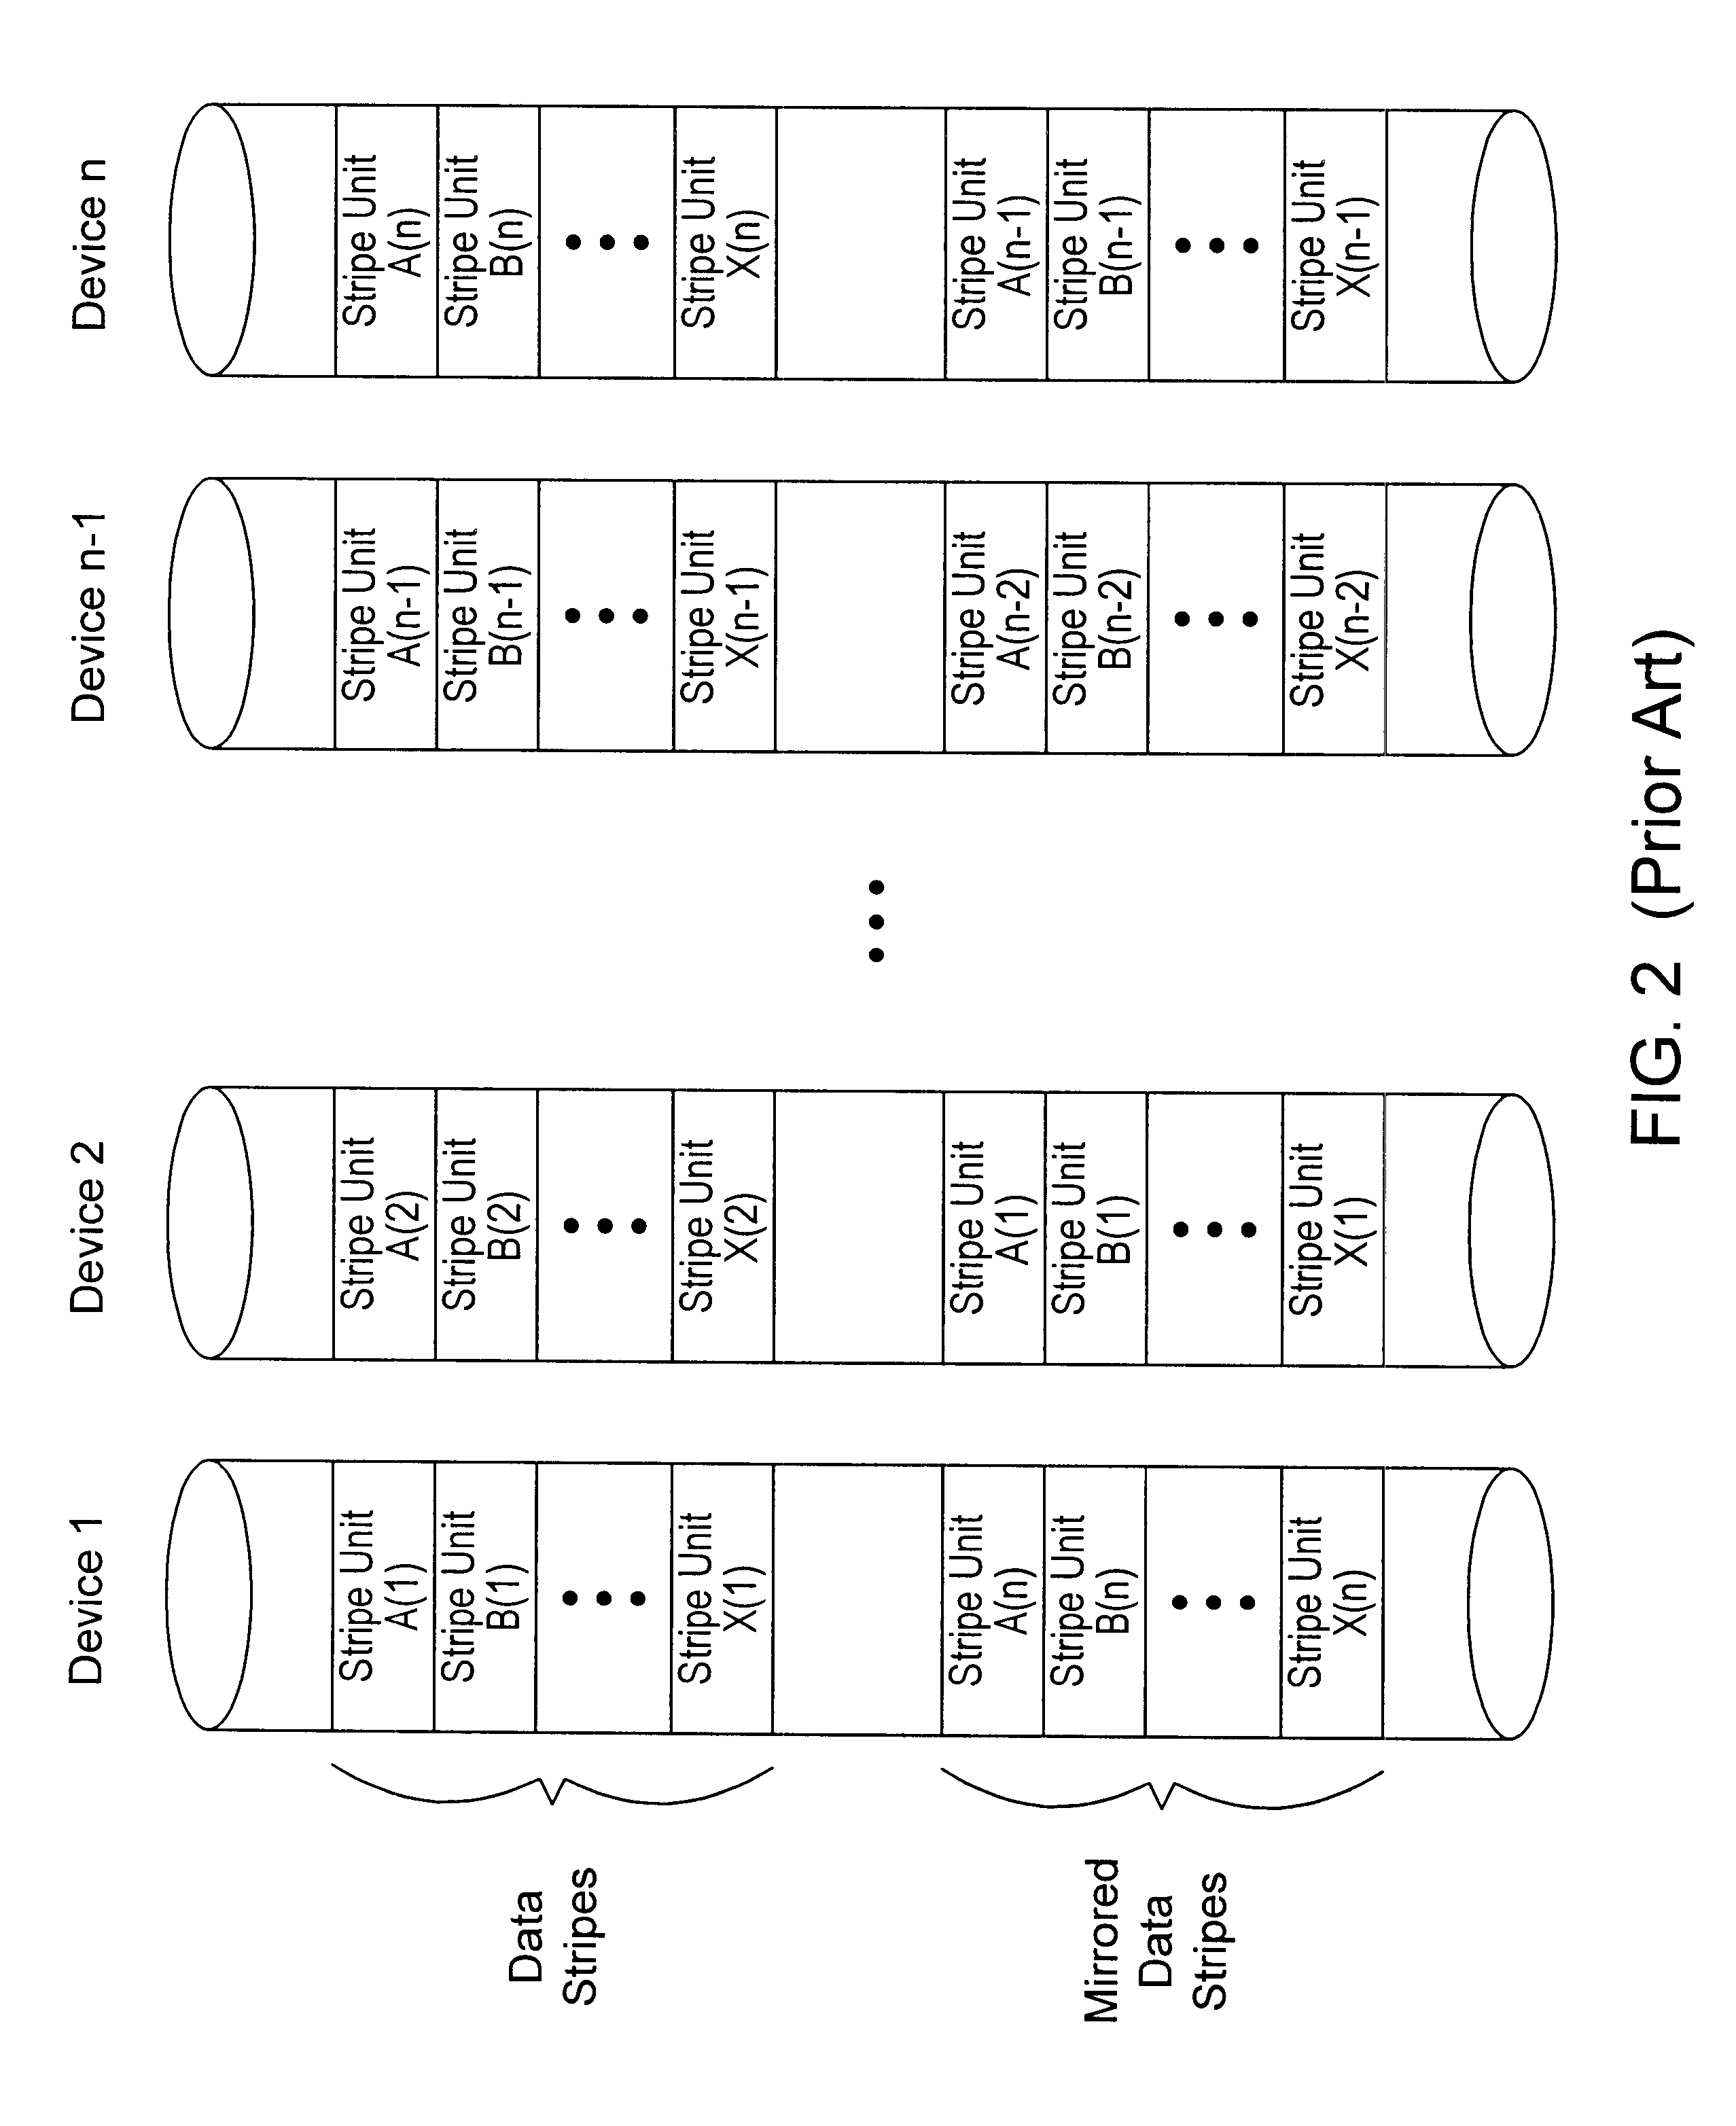 Load balancing configuration for storage arrays employing mirroring and striping